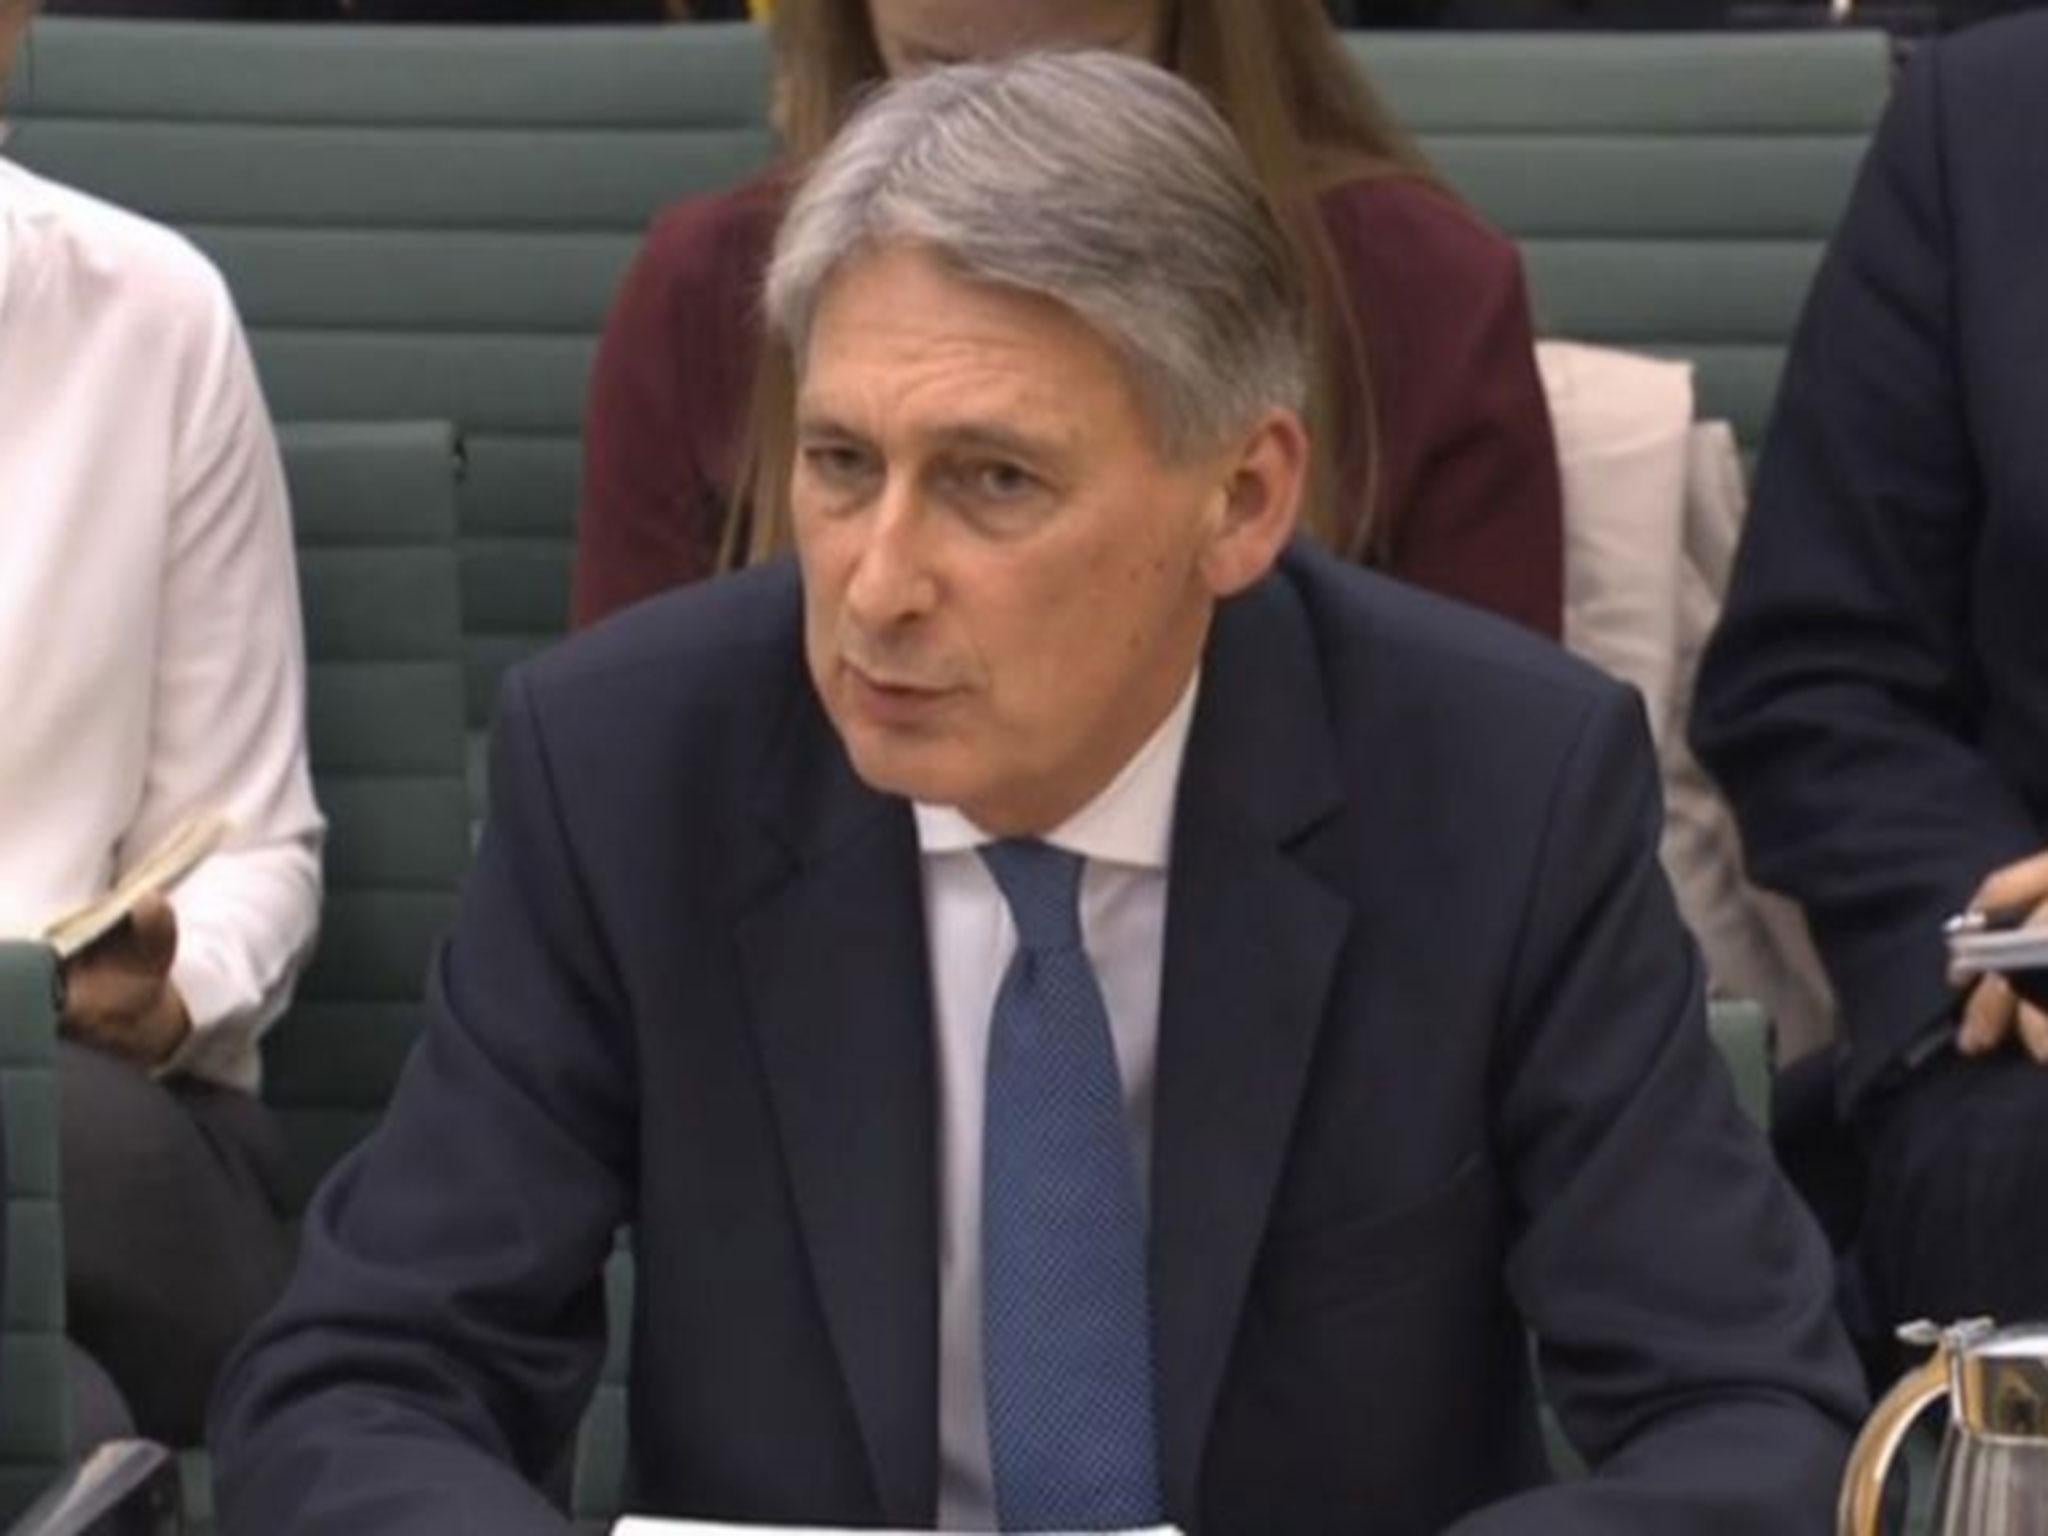 Philip Hammond answers questions in front of the Treasury Select Committee at the House of Commons, London on the subject of the work of the Chancellor of the Exchequer